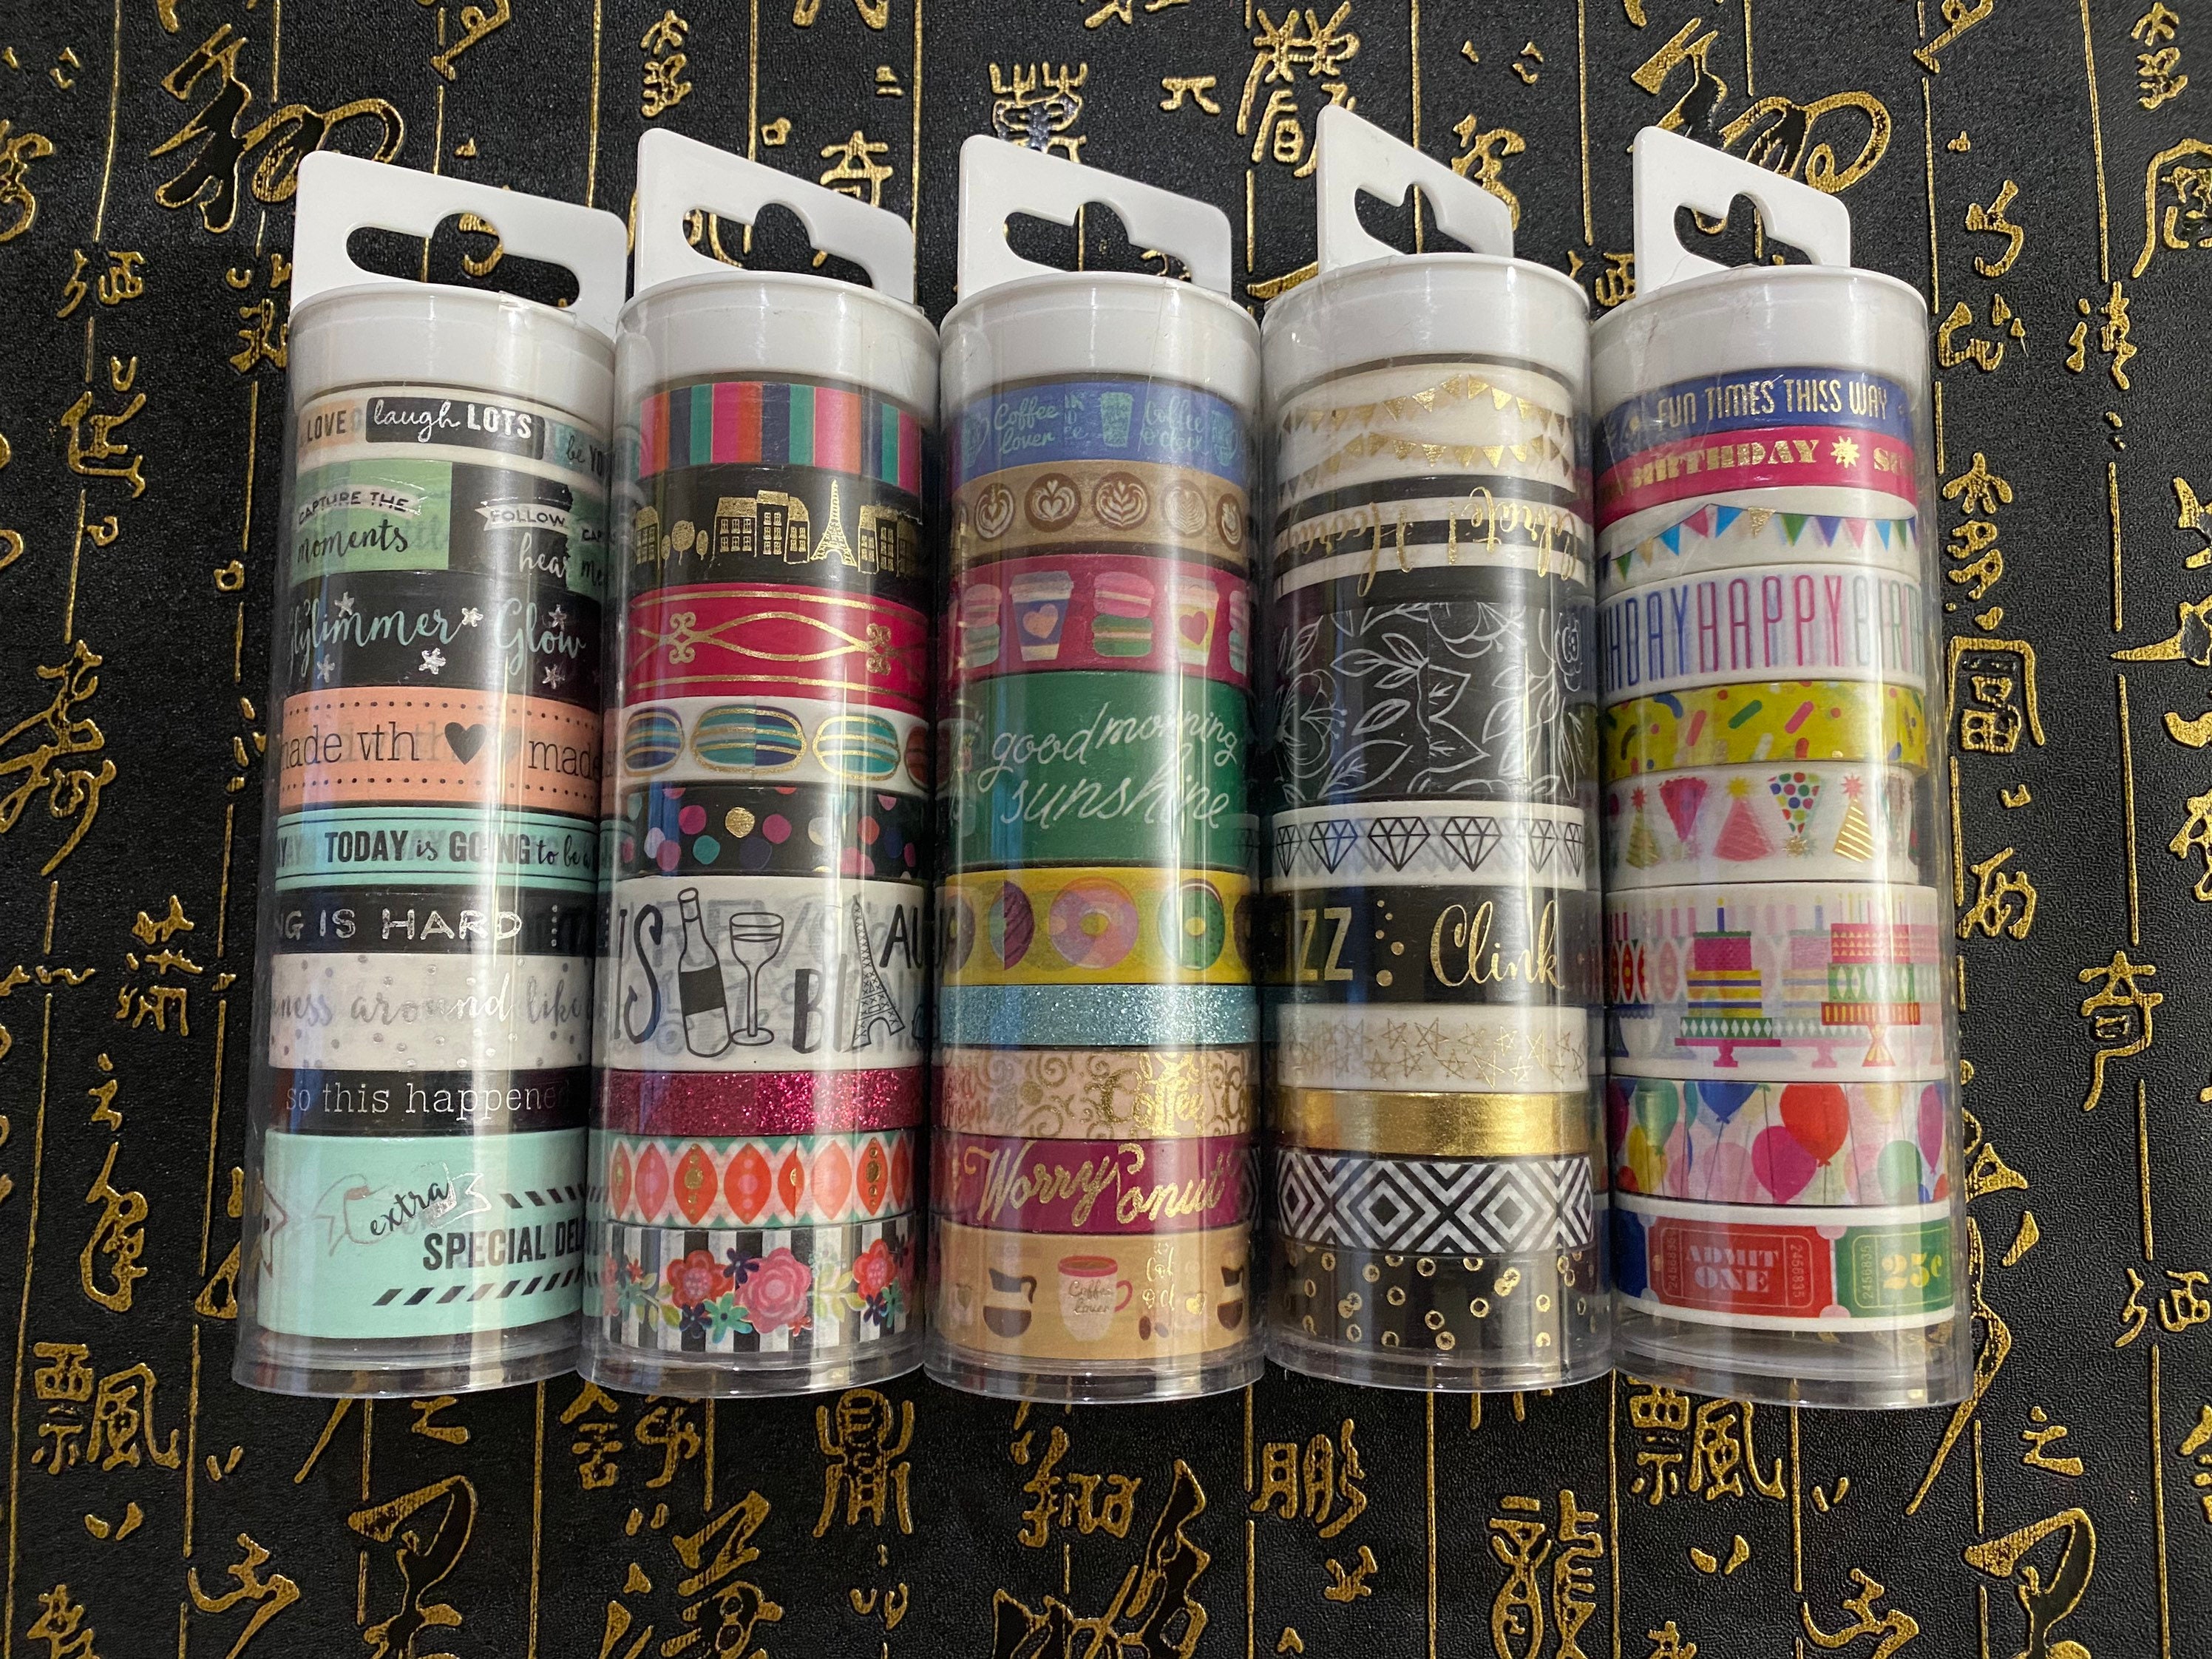 Ms. Sparkle & Co. 10 pk Washi Tapes White & Clear